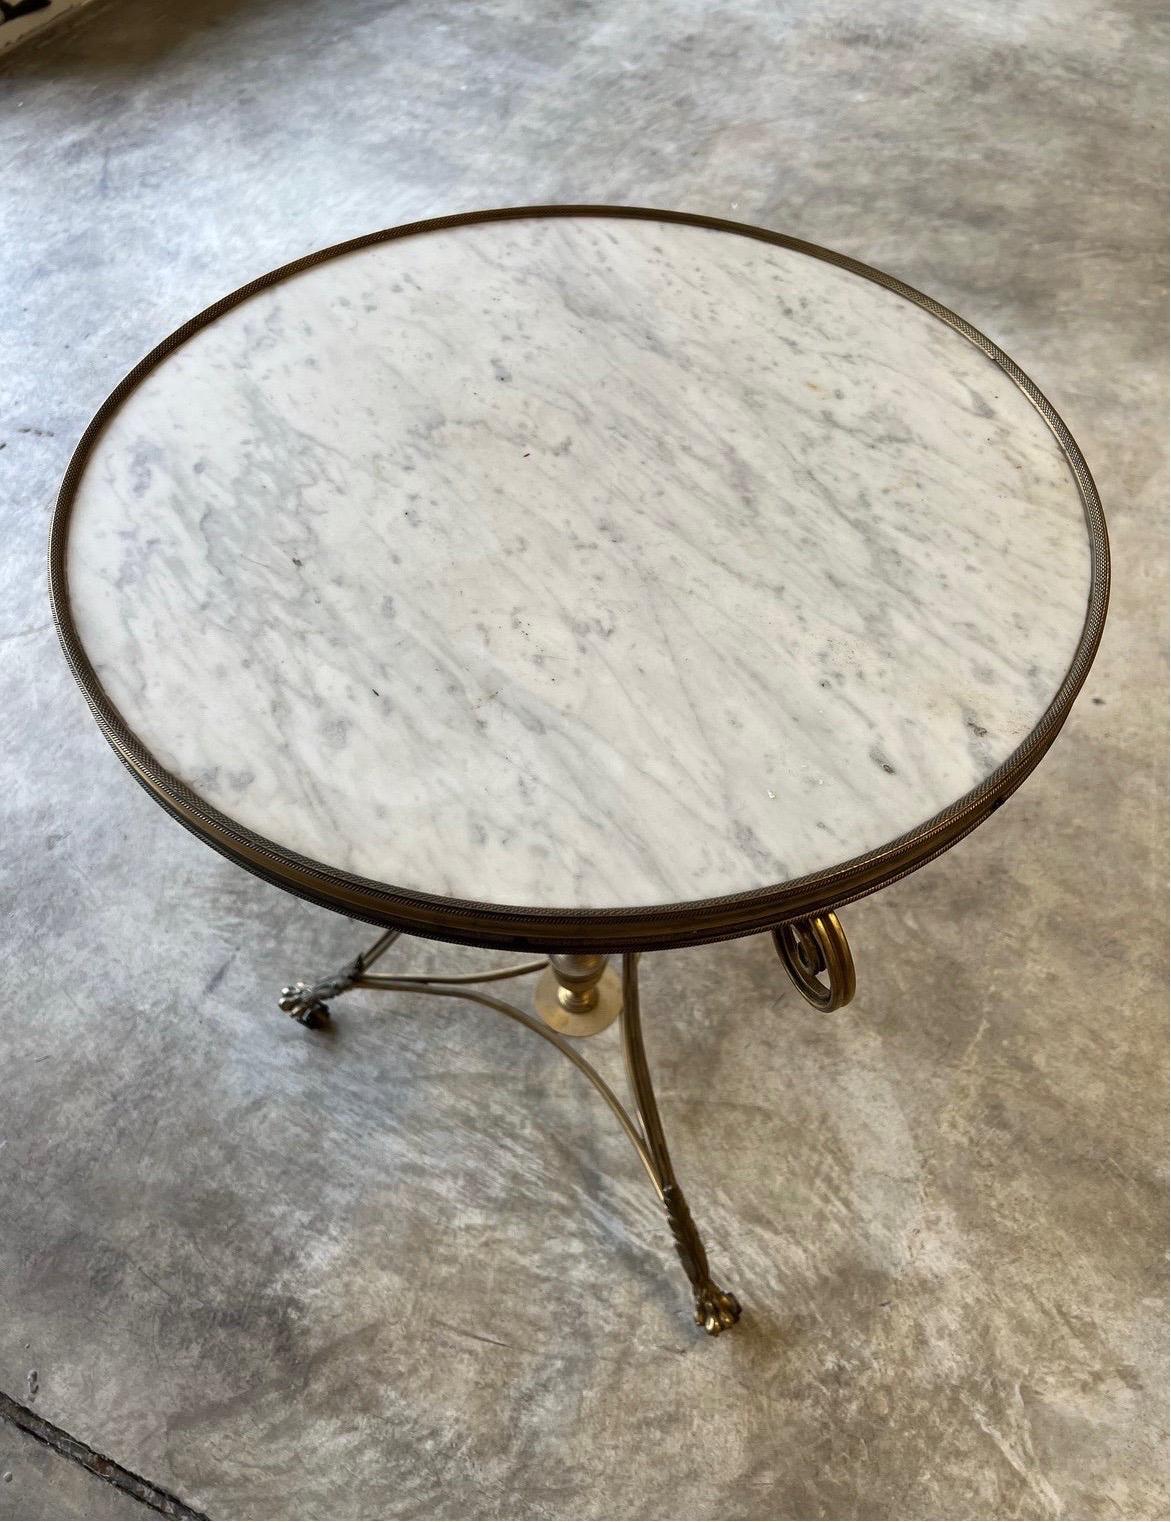 A fine quality french gilt bronze and white marble gueridon table with impressive casting to lower flame finial, hair paw feet on casters. True period piece with a neoclassical urn to the lower element of the table. 